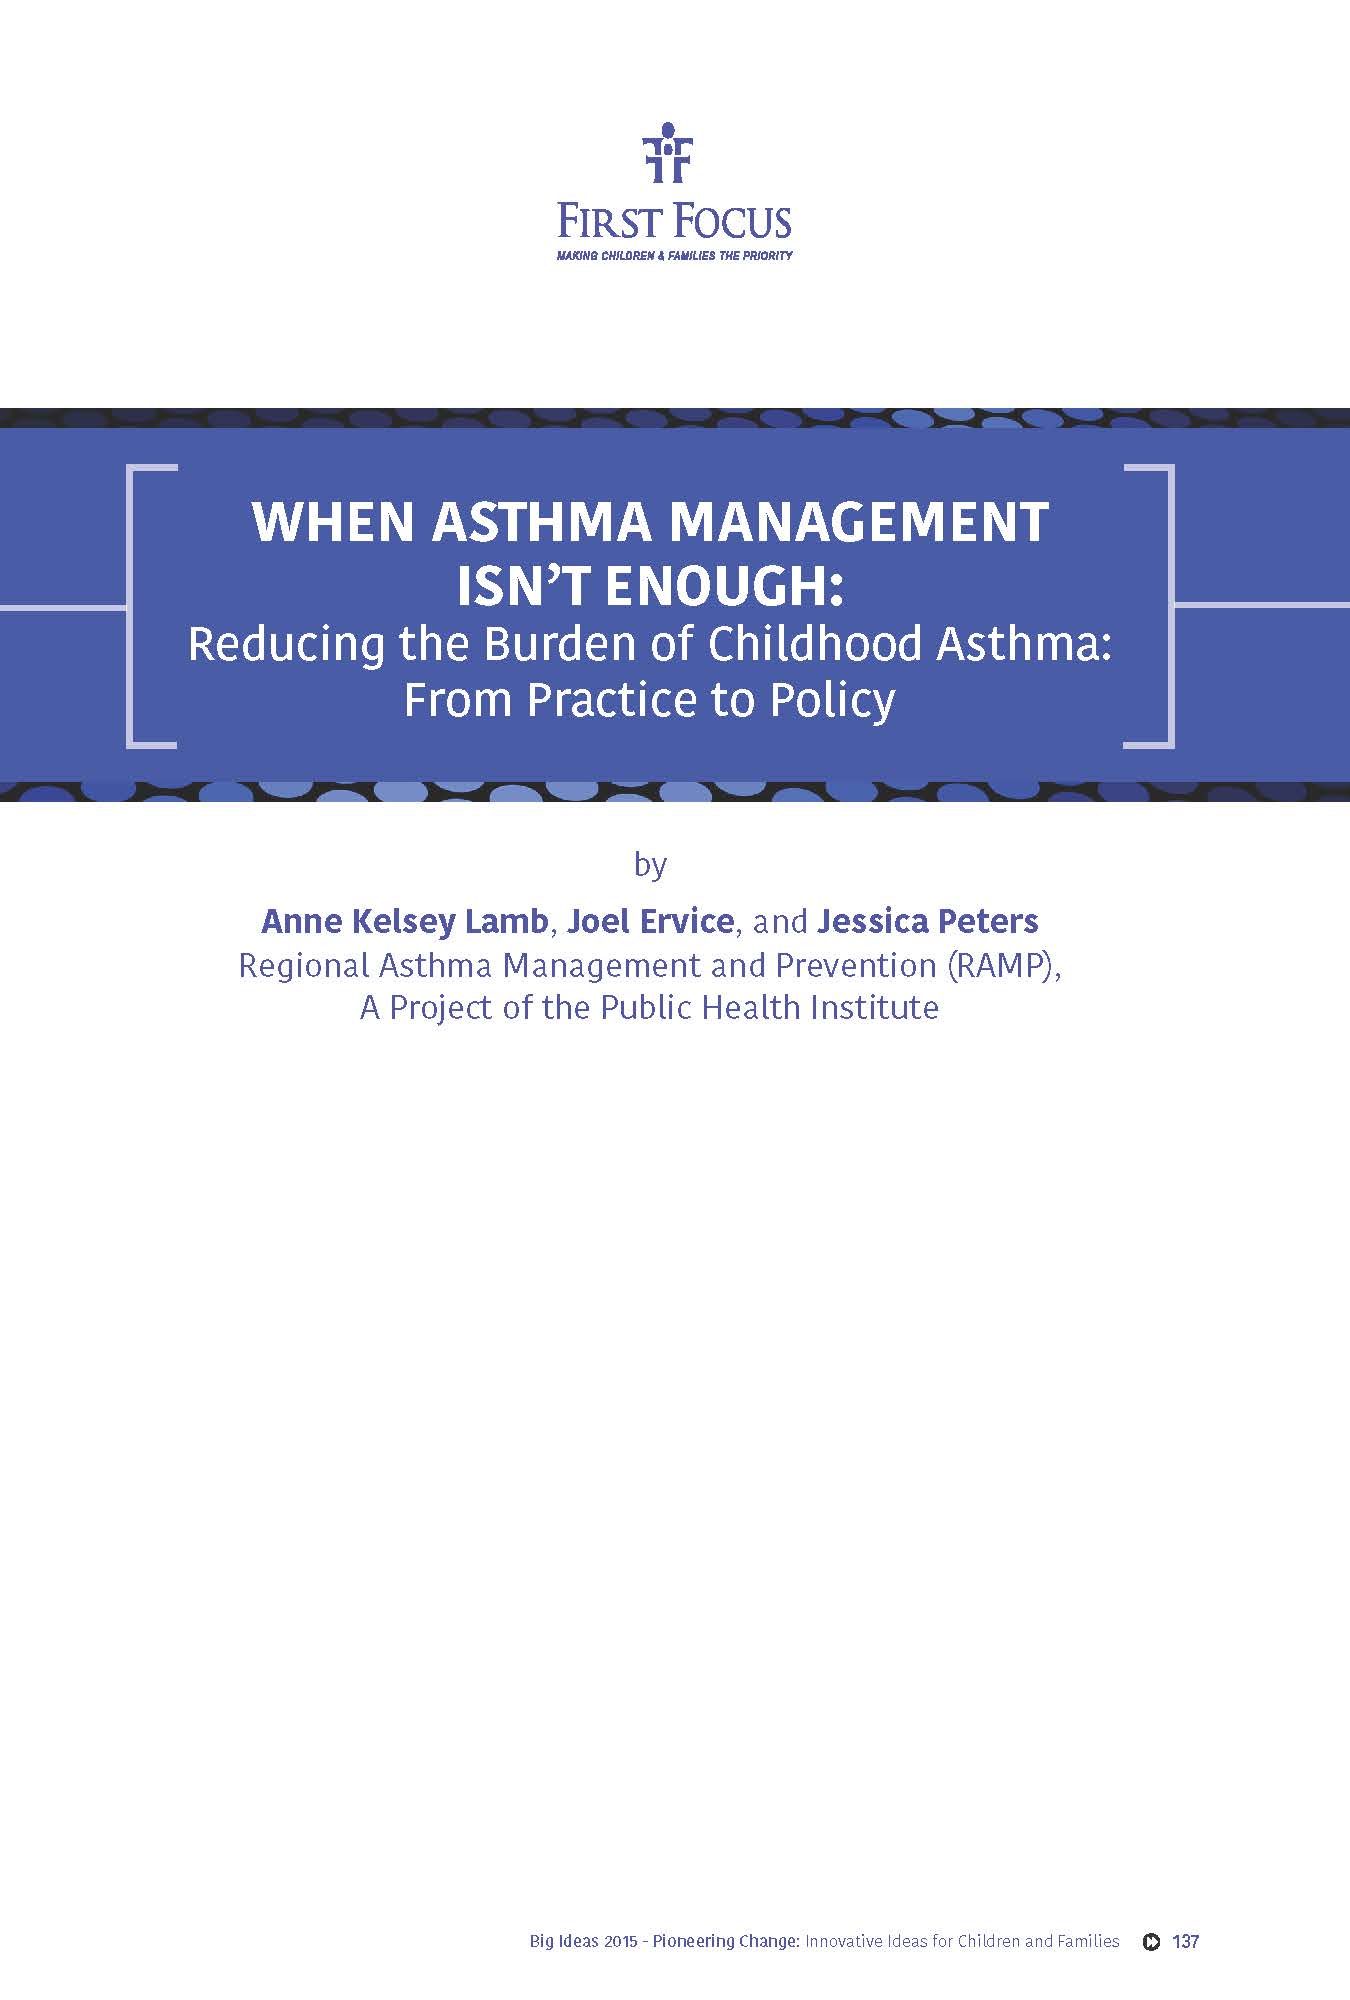 When Asthma Management Isn't Enough_Page_01